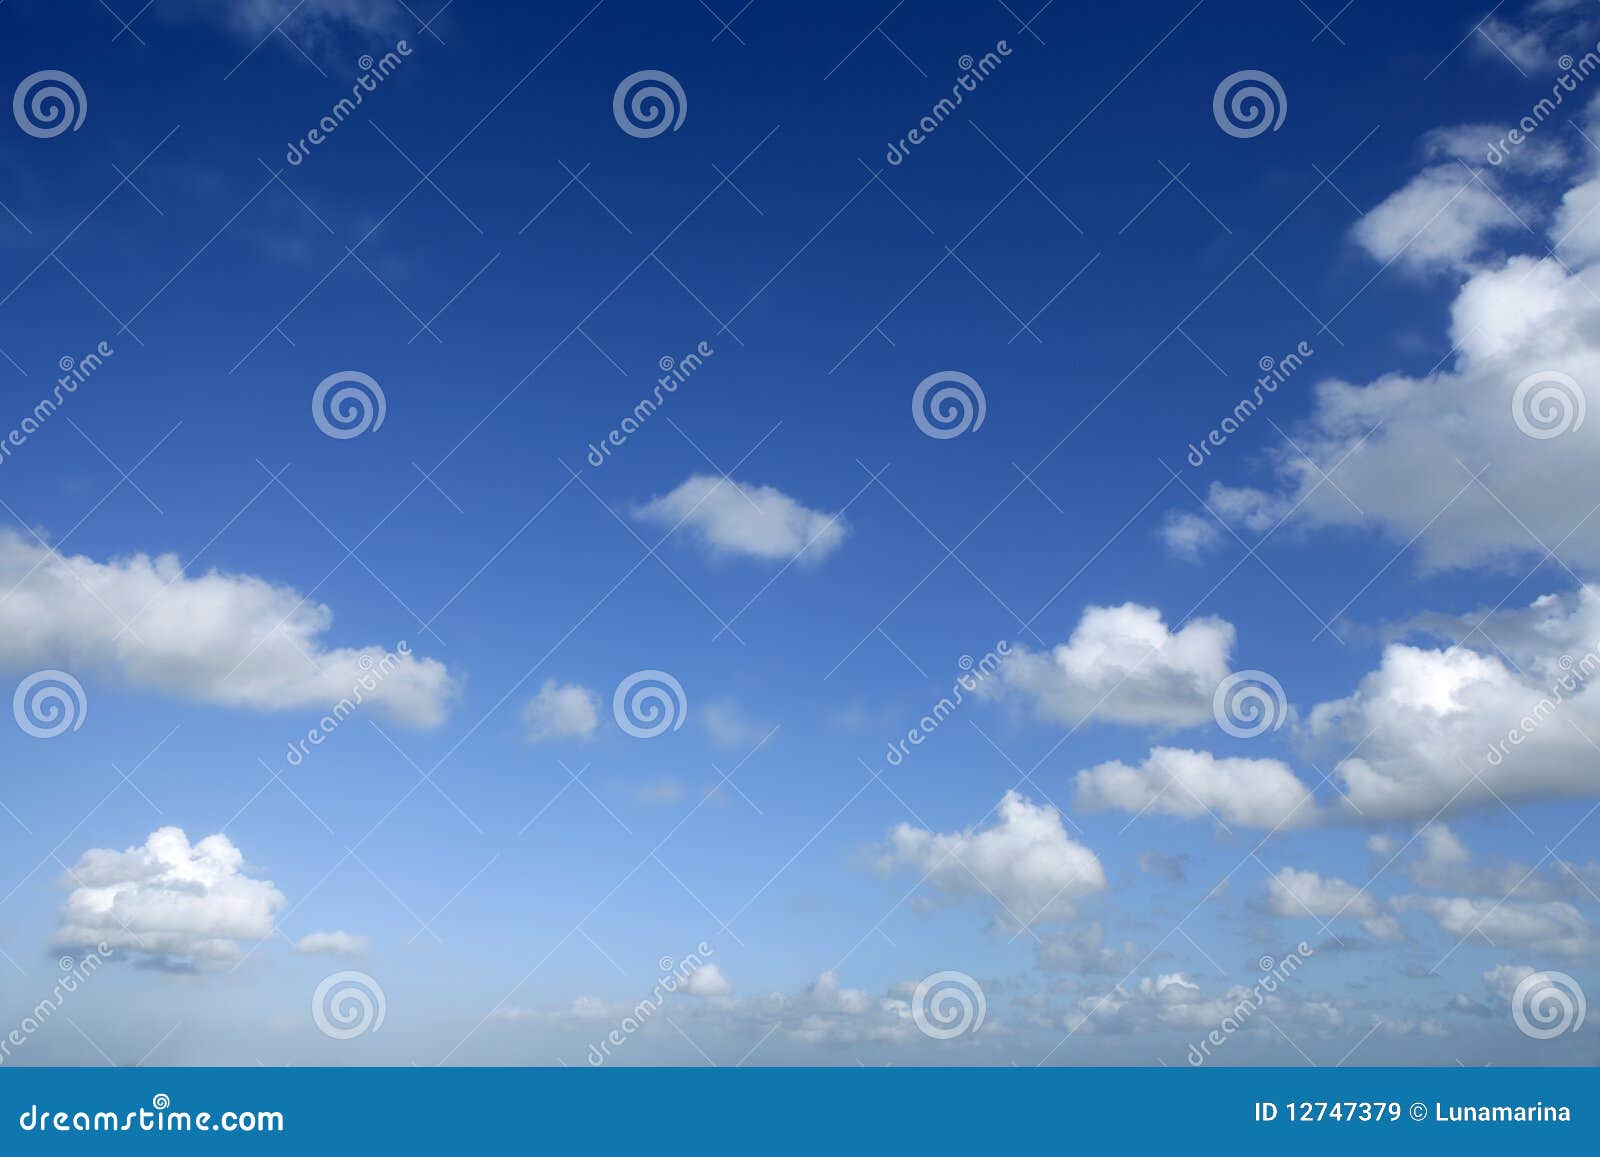 Beautiful blue sky with white clouds. Wide angle view. 17659598